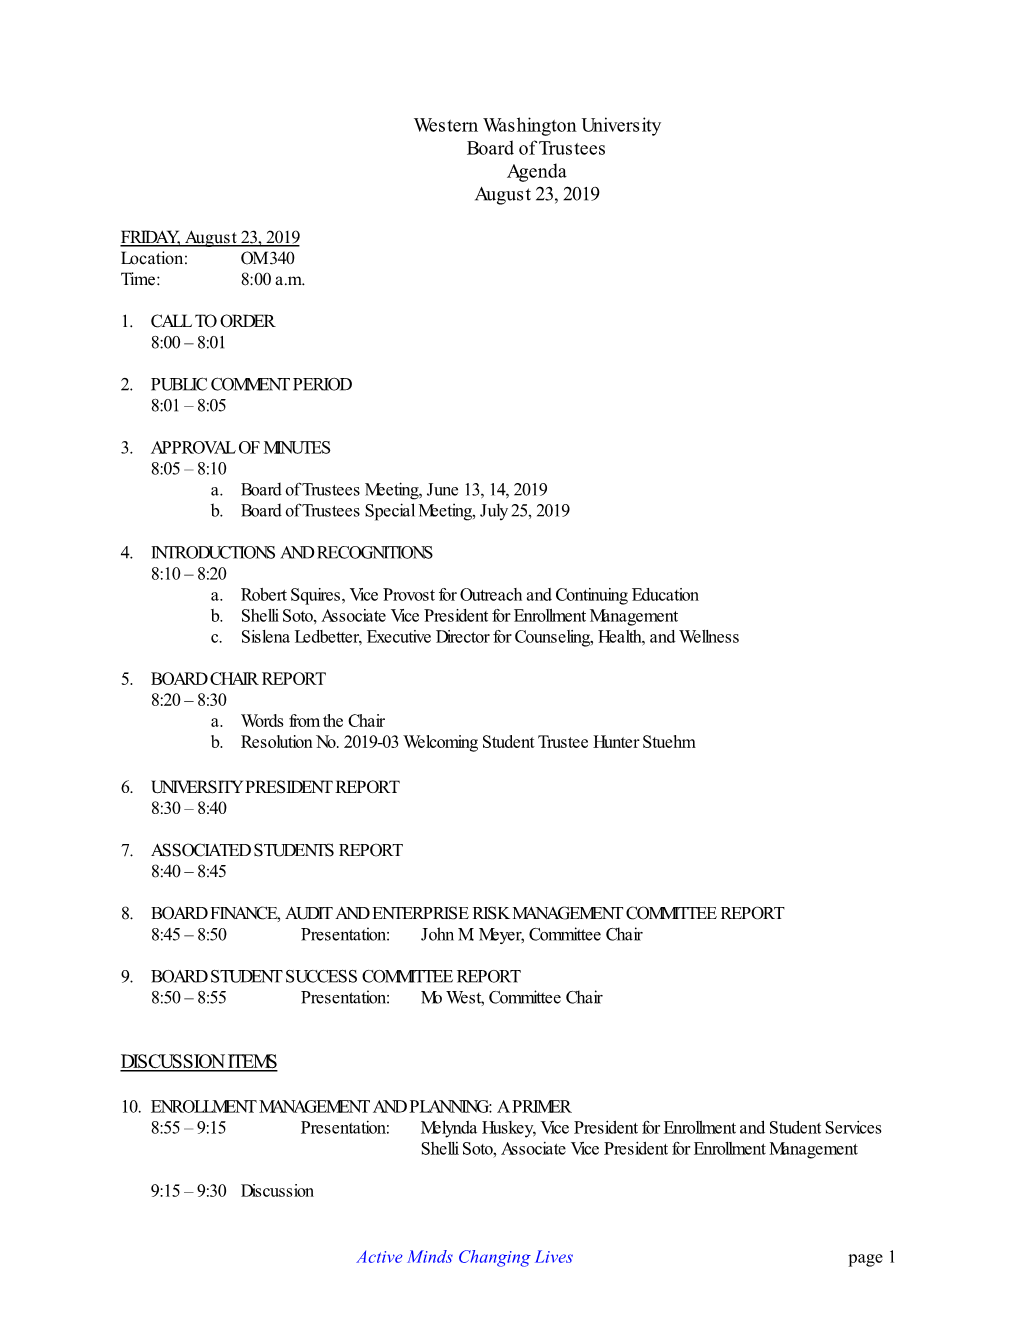 Western Washington University Board of Trustees Agenda August 23, 2019 DISCUSSION ITEMS